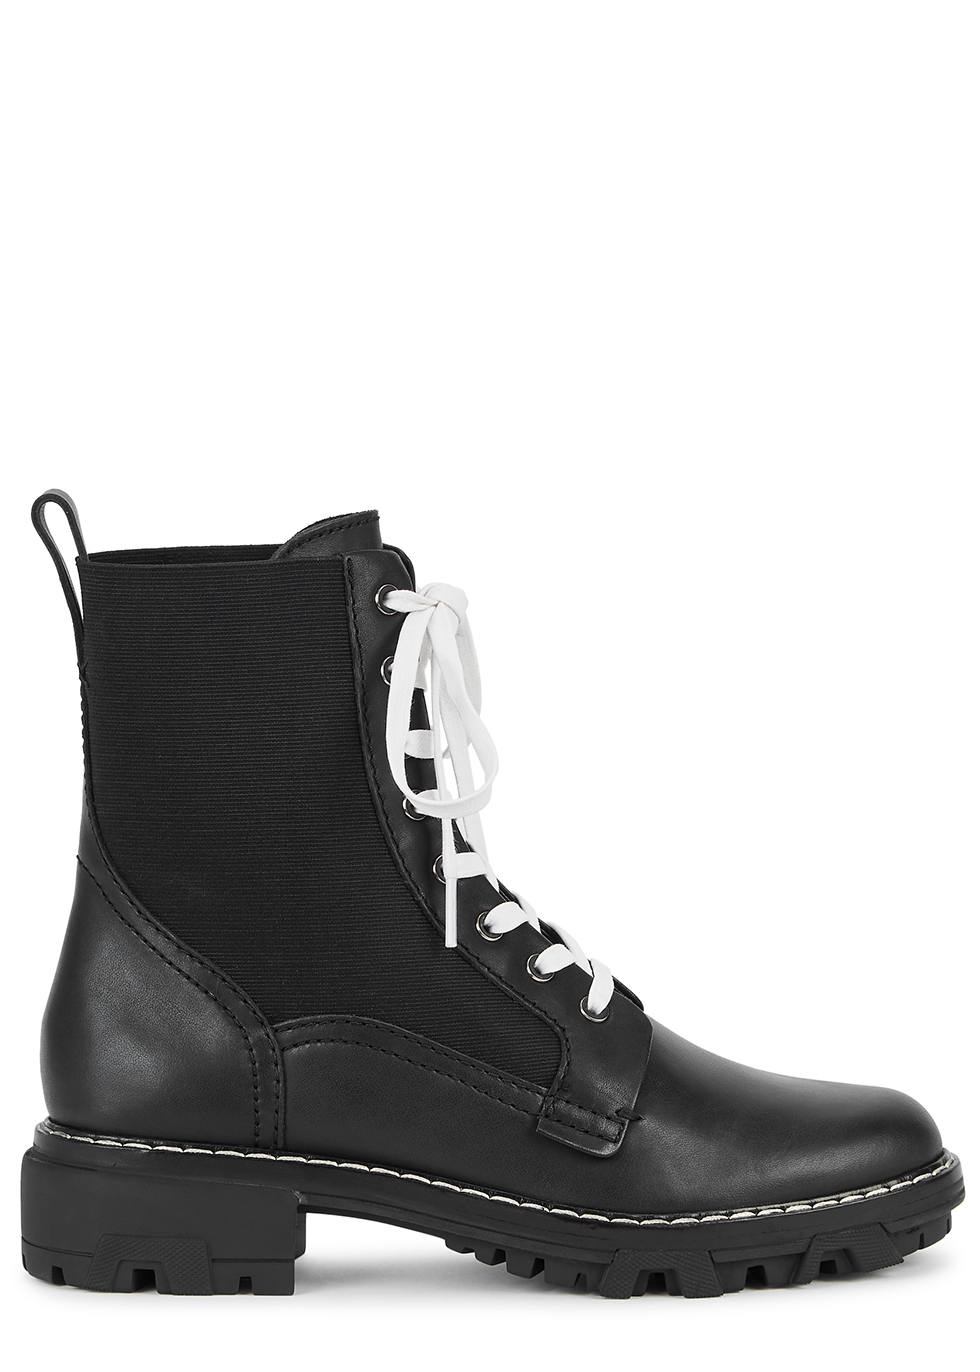 cool black leather boots